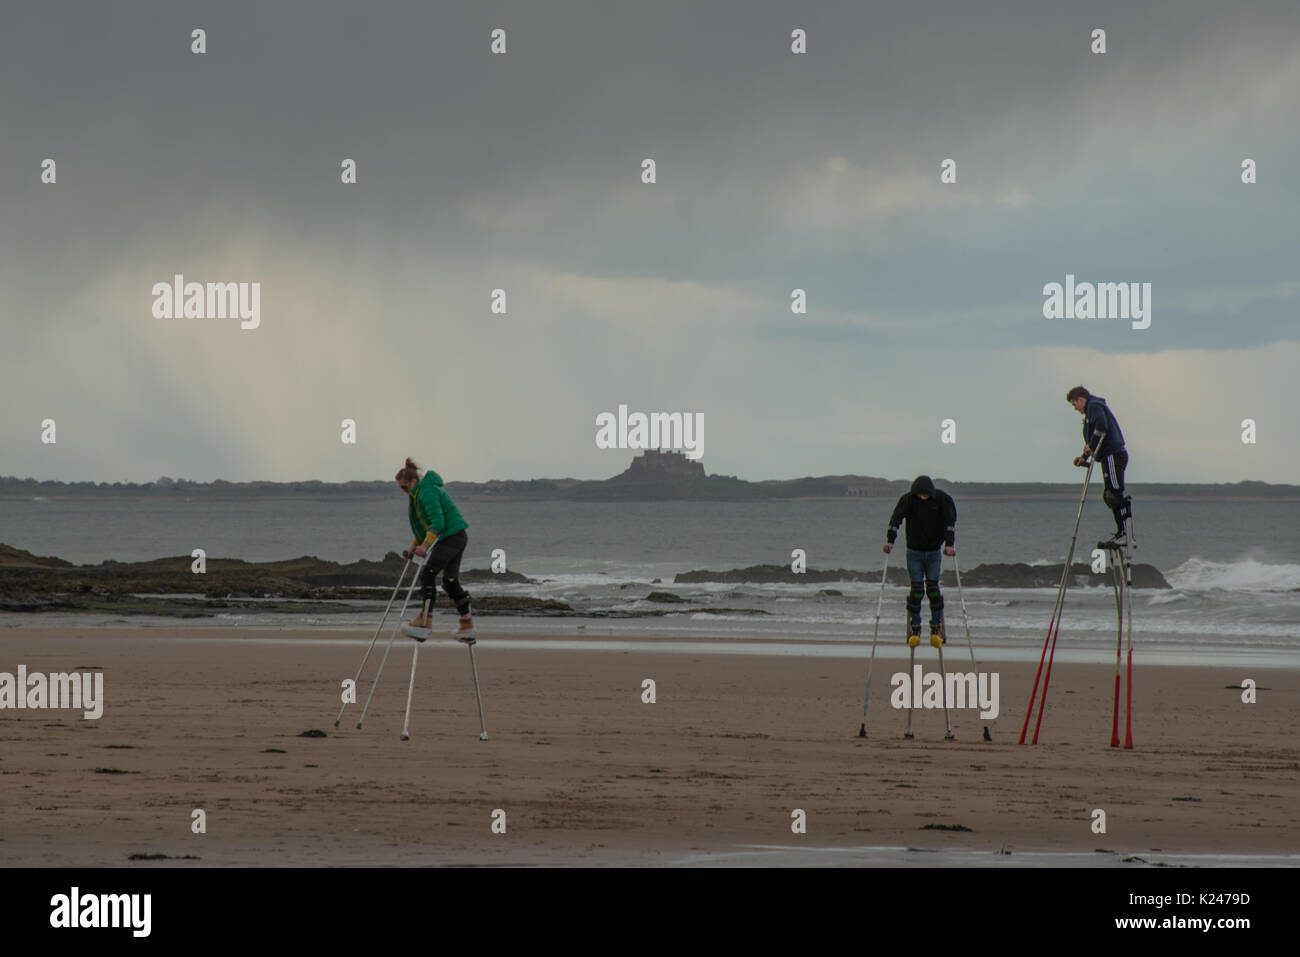 Three stilt walkers in practice on the beach in Northumberland as rain approaches and  with Bamburgh castle in background Stock Photo